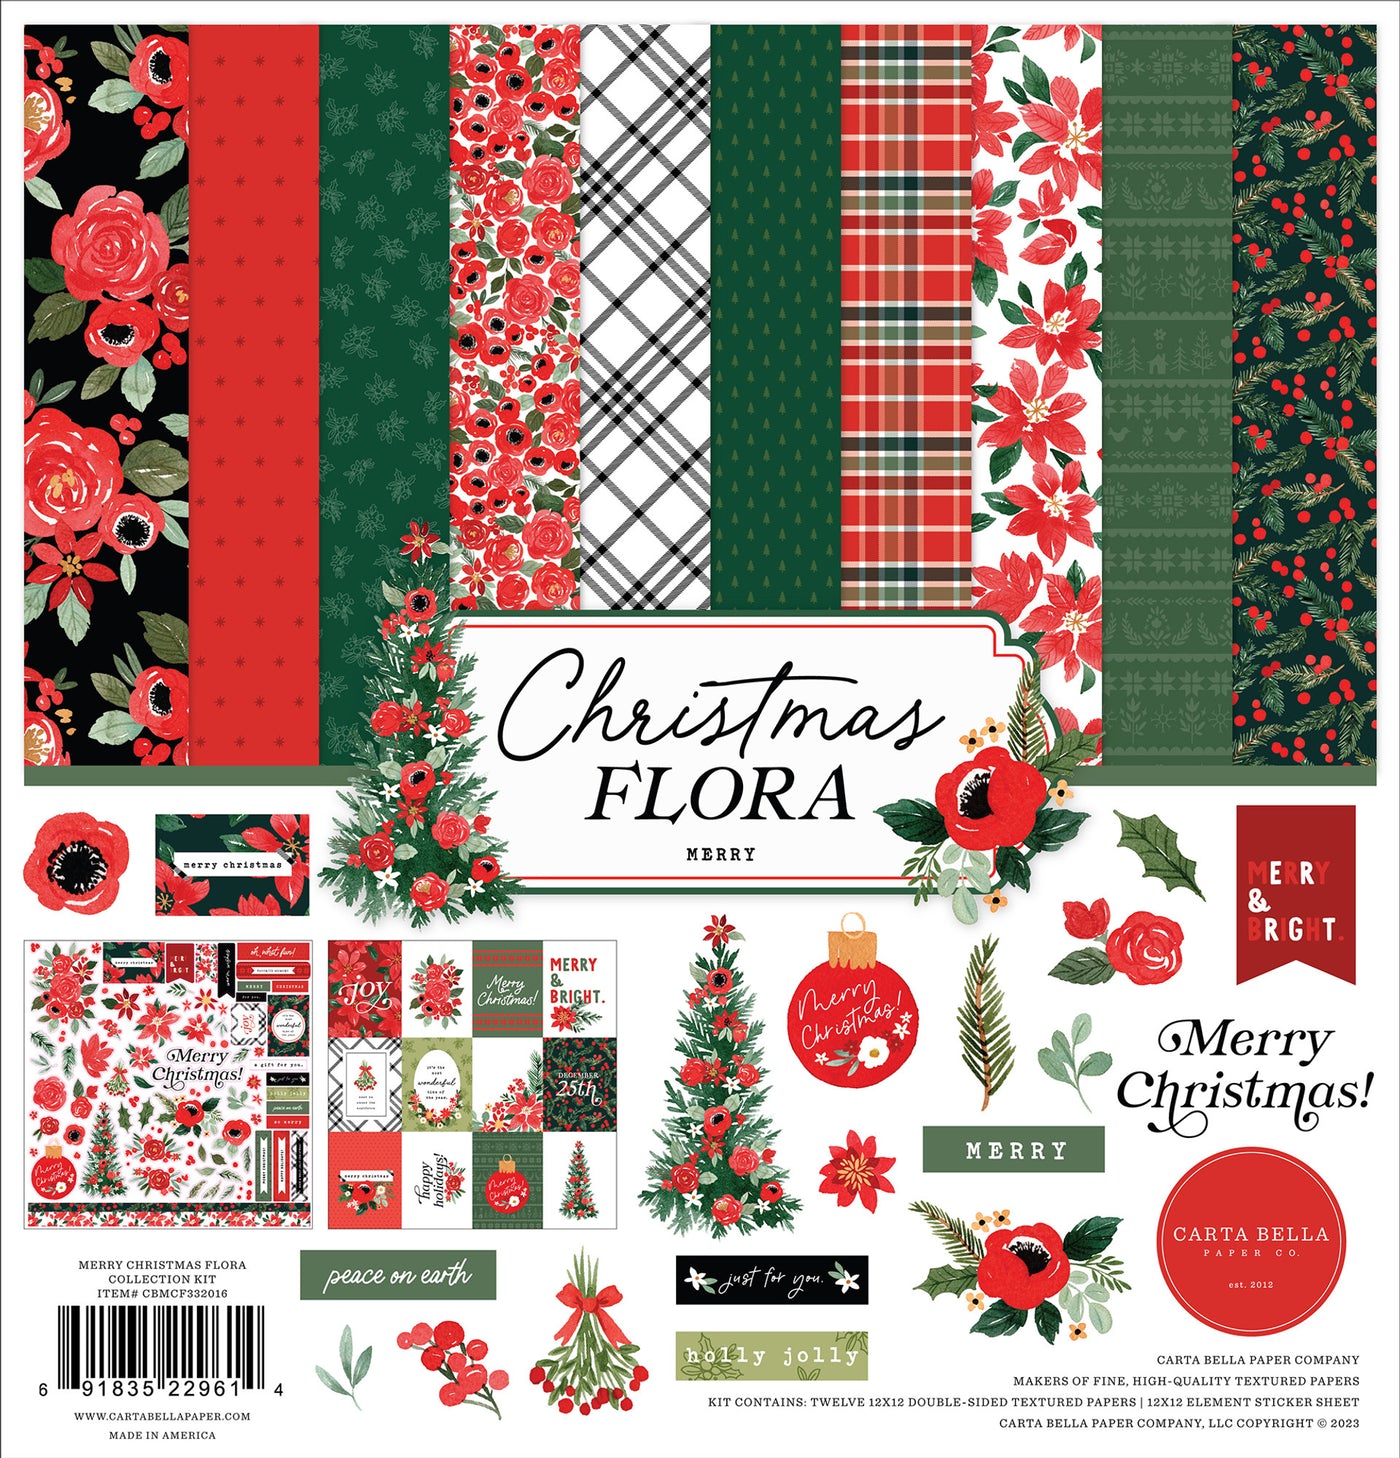 Collection Kit for paper crafts includes 12 double-sided papers with all the beautiful florals of Christmastime. Matching sticker elements sheet included.